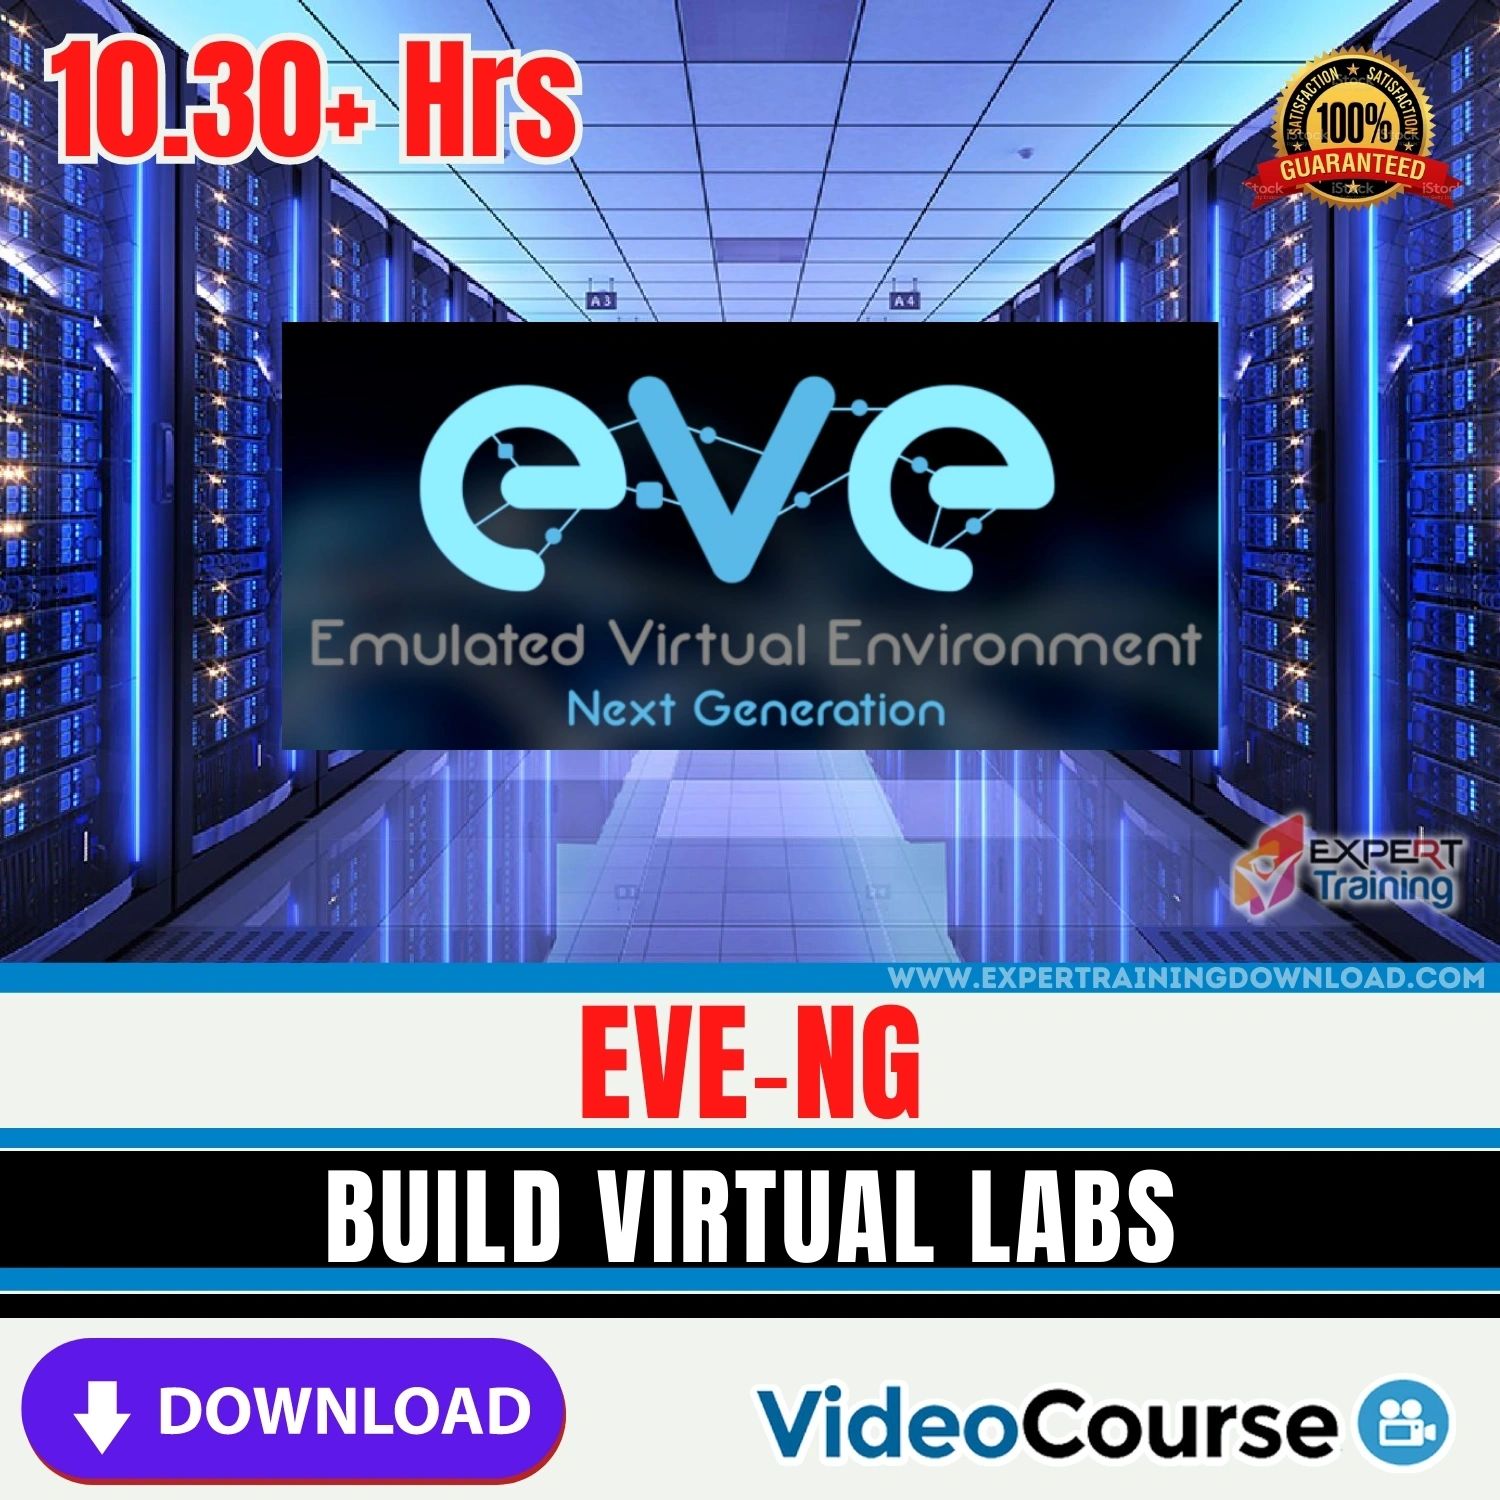 EVE-NG Training Course to Build Virtual Labs